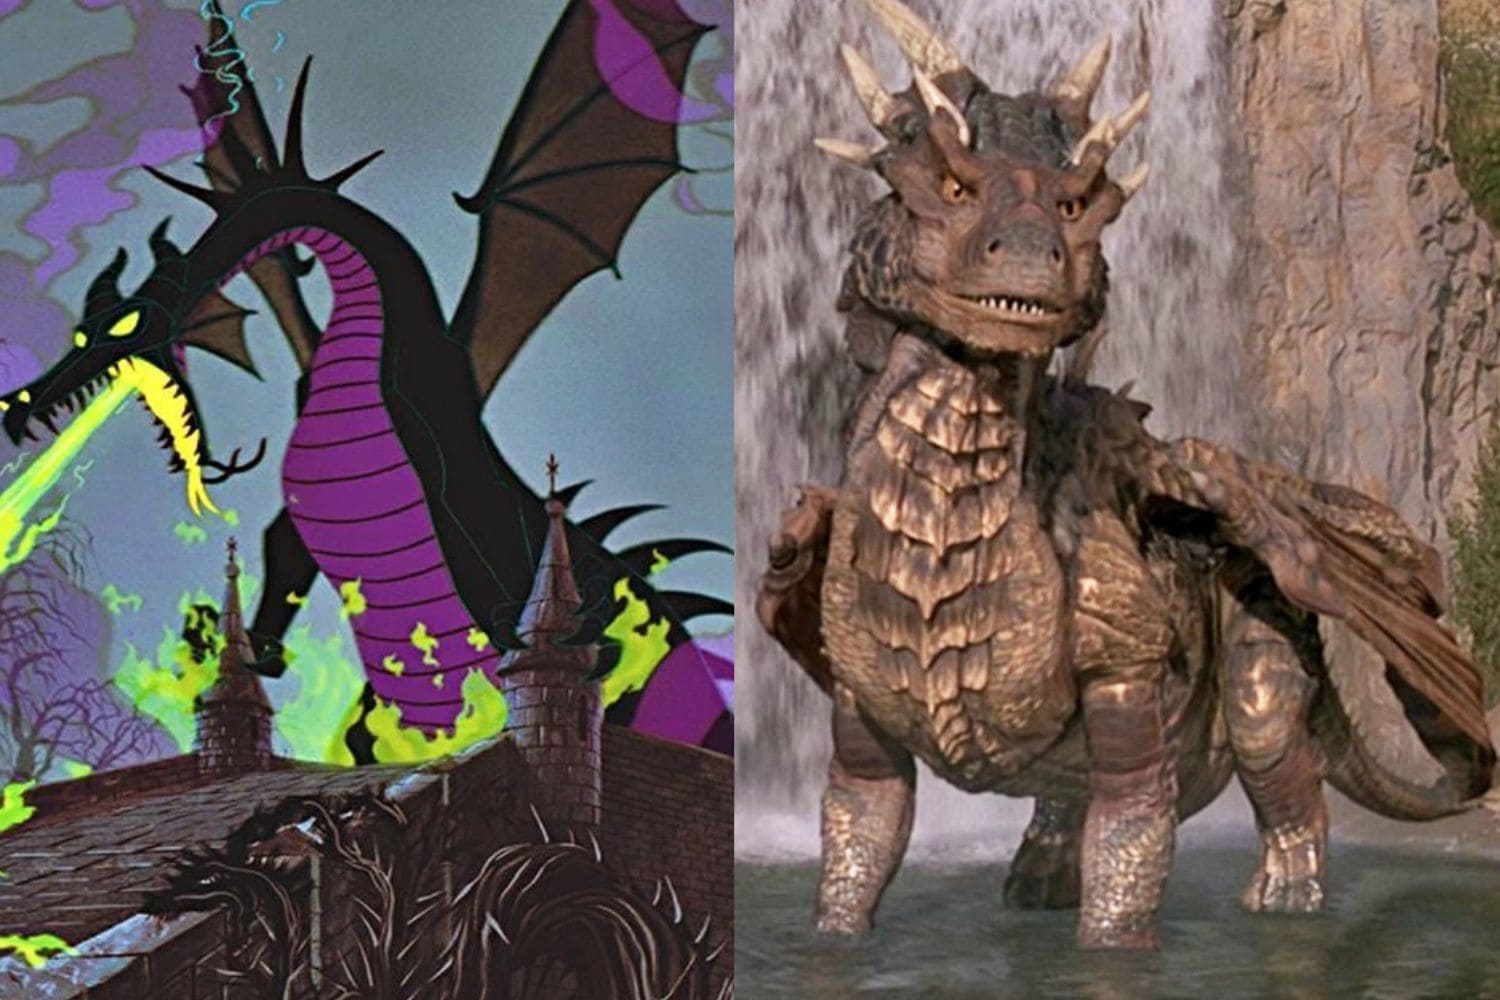 Biggest dragon in popular-culture? - Page 3